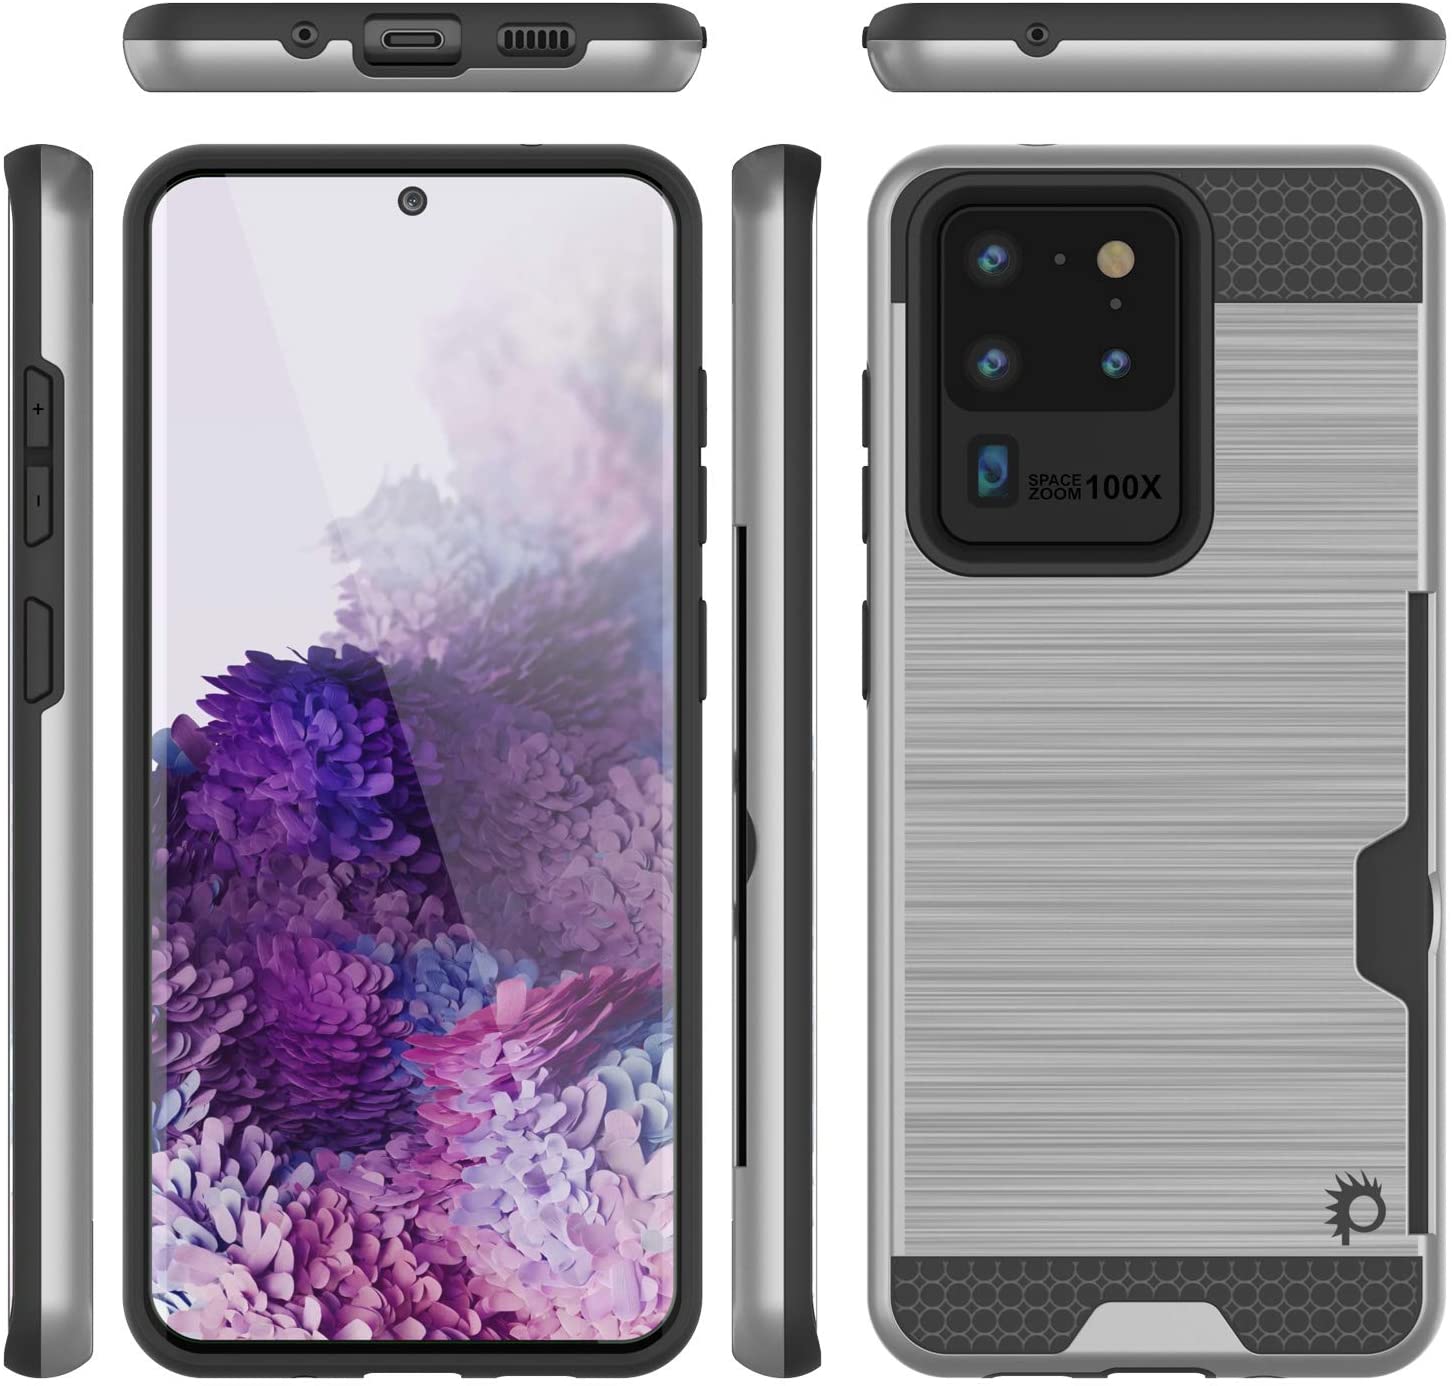 Galaxy S20 Ultra Case, PUNKcase [SLOT Series] [Slim Fit] Dual-Layer Armor Cover w/Integrated Anti-Shock System, Credit Card Slot [Silver]